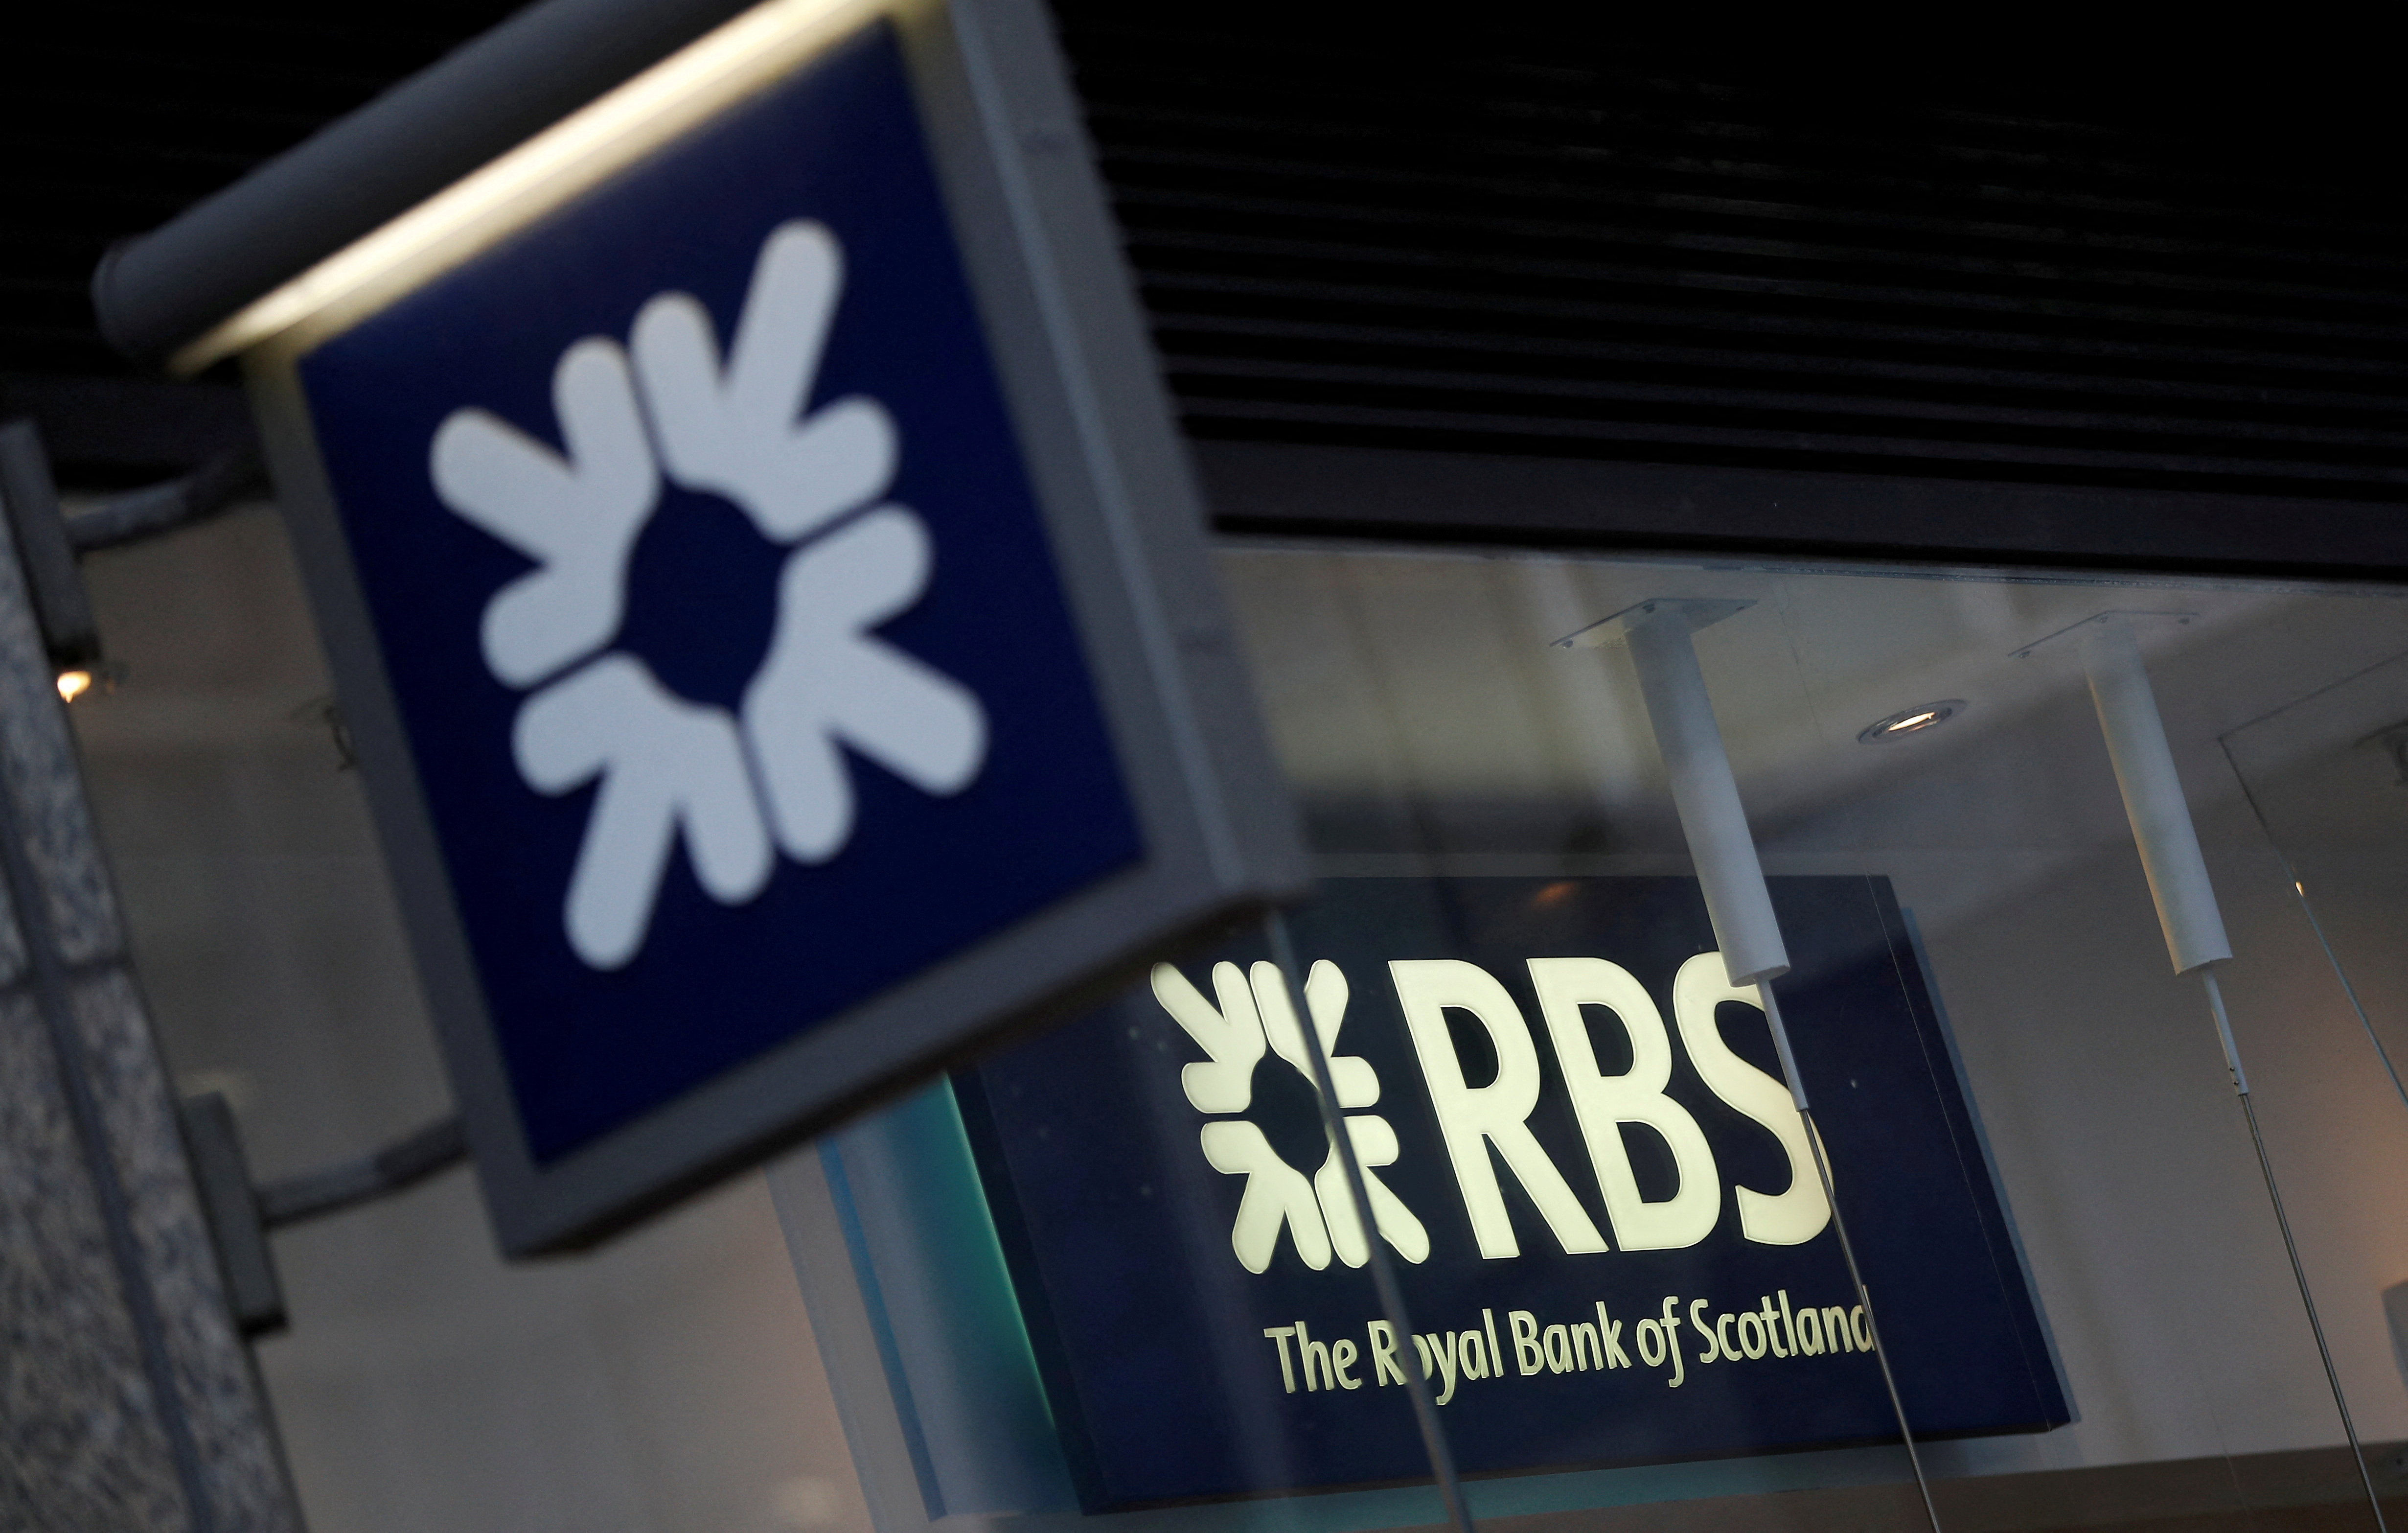 Royal Bank of Scotland signs are seen at a branch of the bank, in London